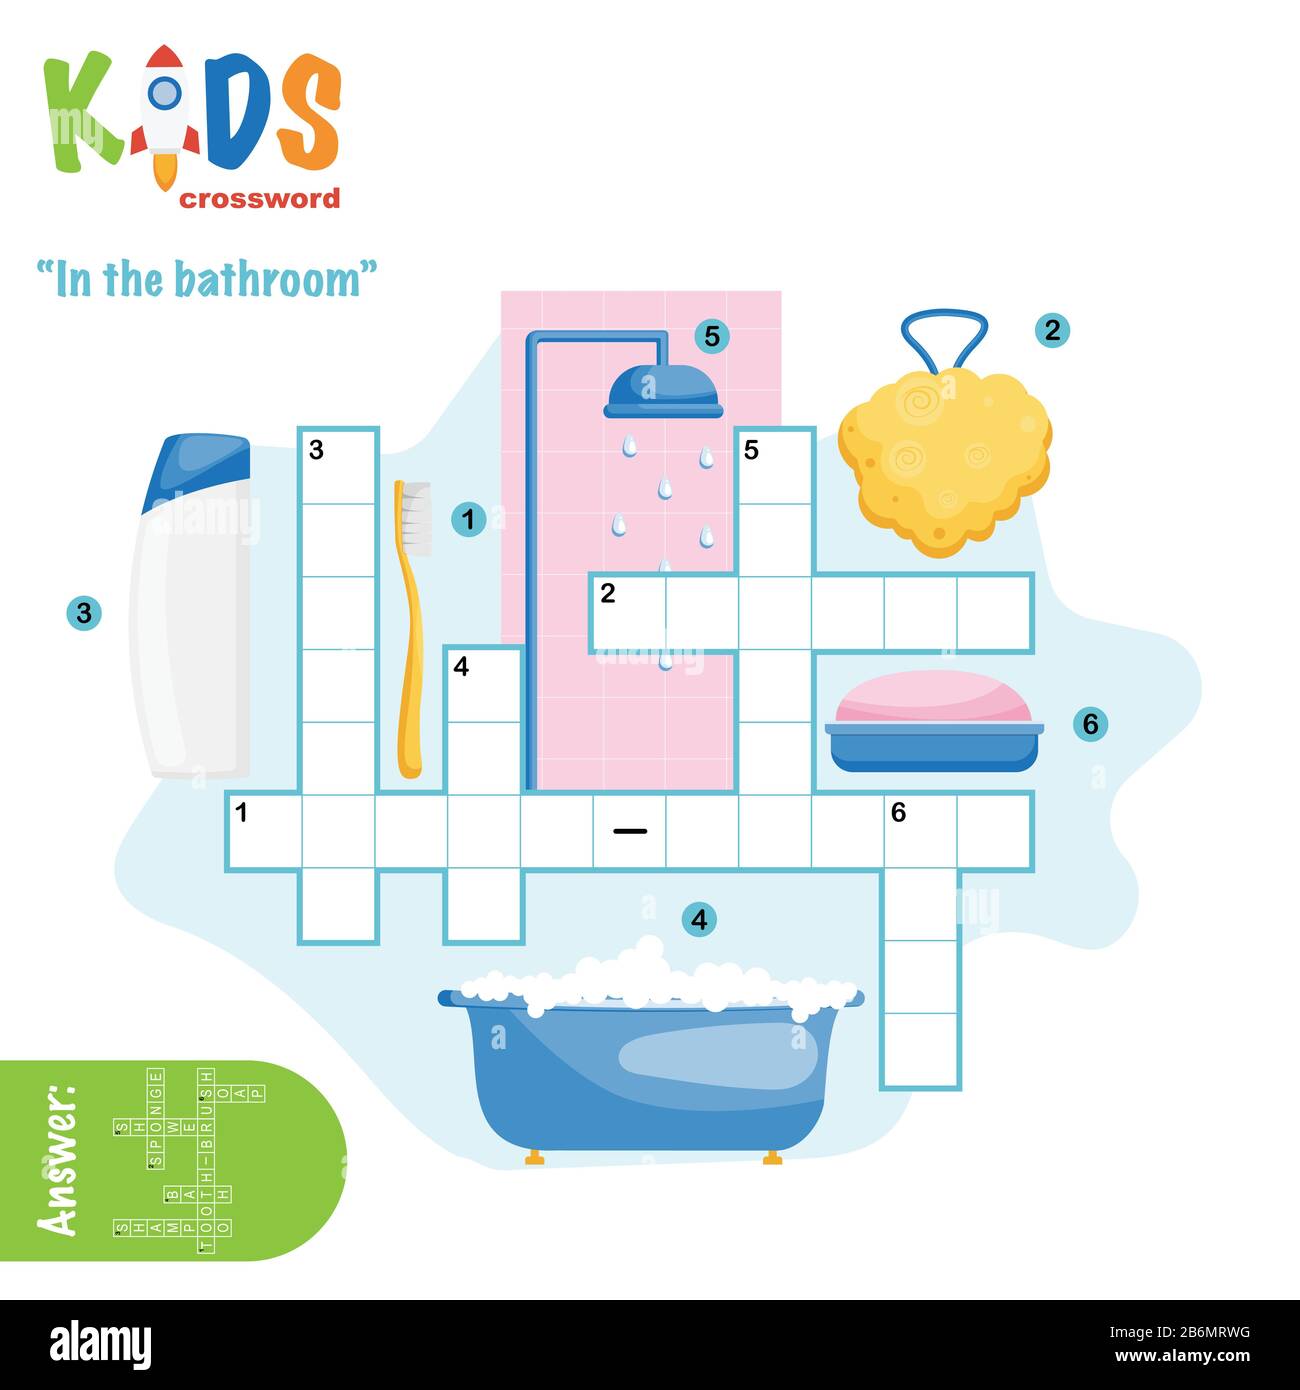 Easy crossword puzzle 'In the bathroom', for children in elementary and middle school. Fun way to practice language comprehension and expand vocabular Stock Vector